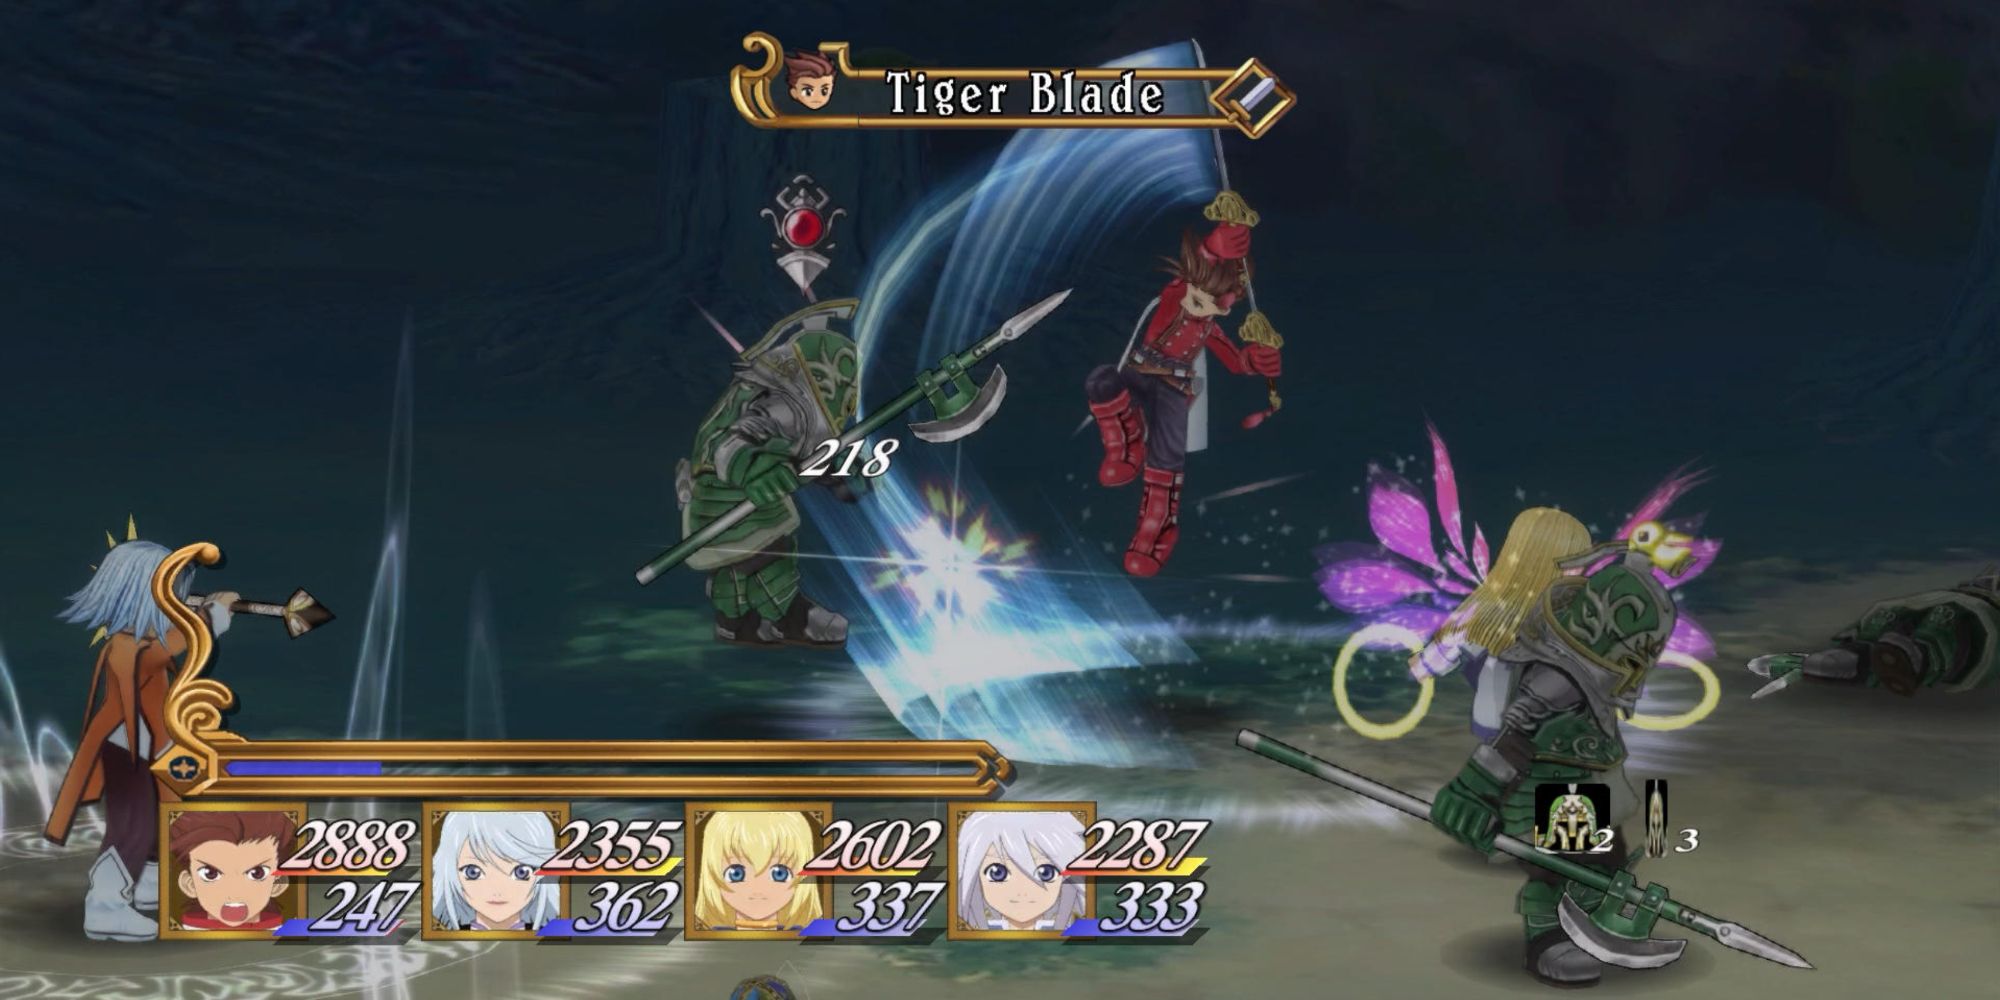 Lloyd performing his Tiger Blade Tech in Tales of Symphonia Remastered